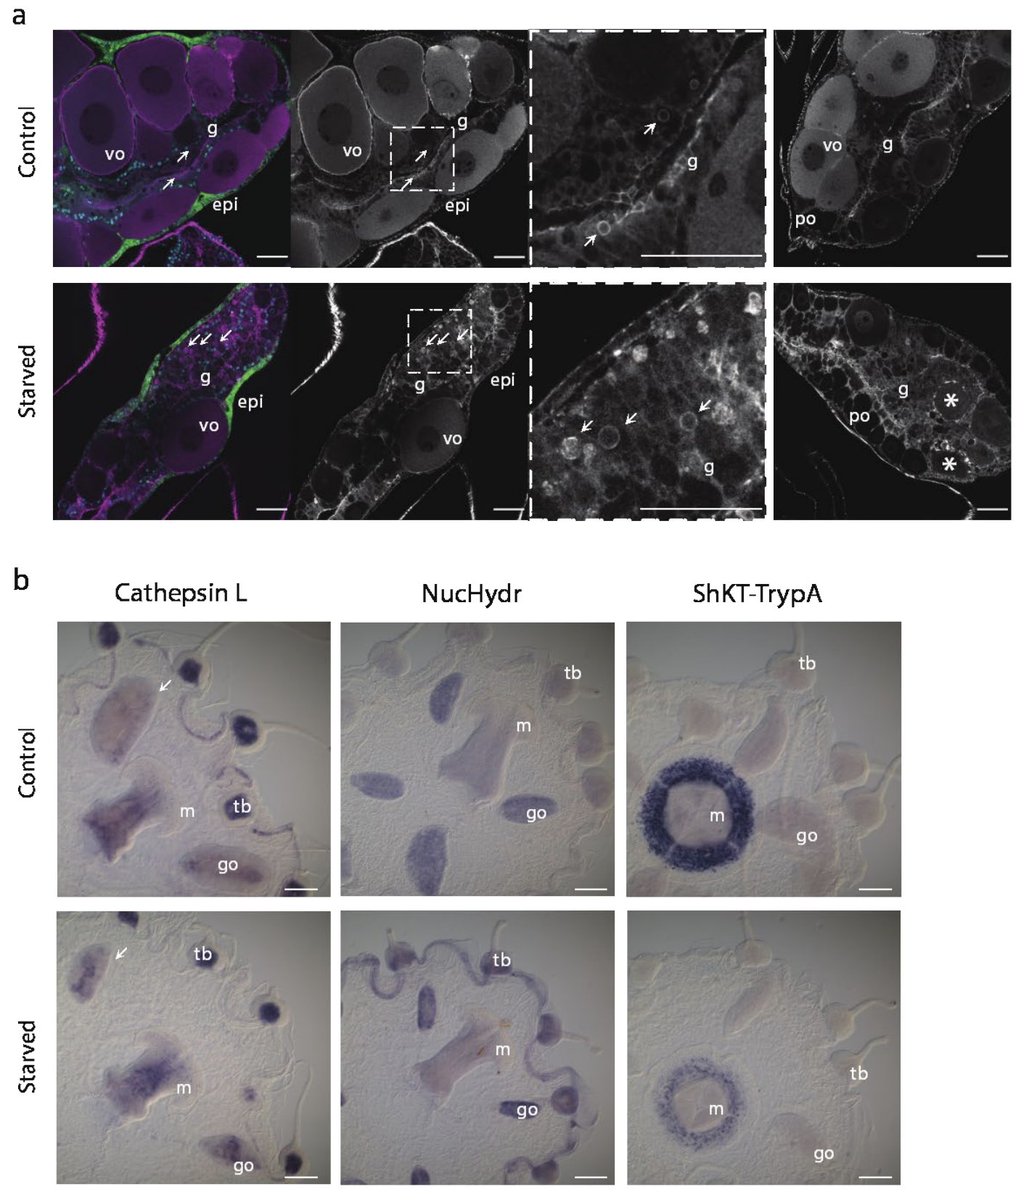 In situs of perturbed genes was illuminating (beautiful work by  @AnnaFerraioli_  @Leclere_L  @Clytia_Vlfr). E.g., the gastro-digestive cell marker CathepsinL confirms extensive reorganization of the gastroderm in starved animals, especially in the oocyte-depleted gonad (arrows).10/